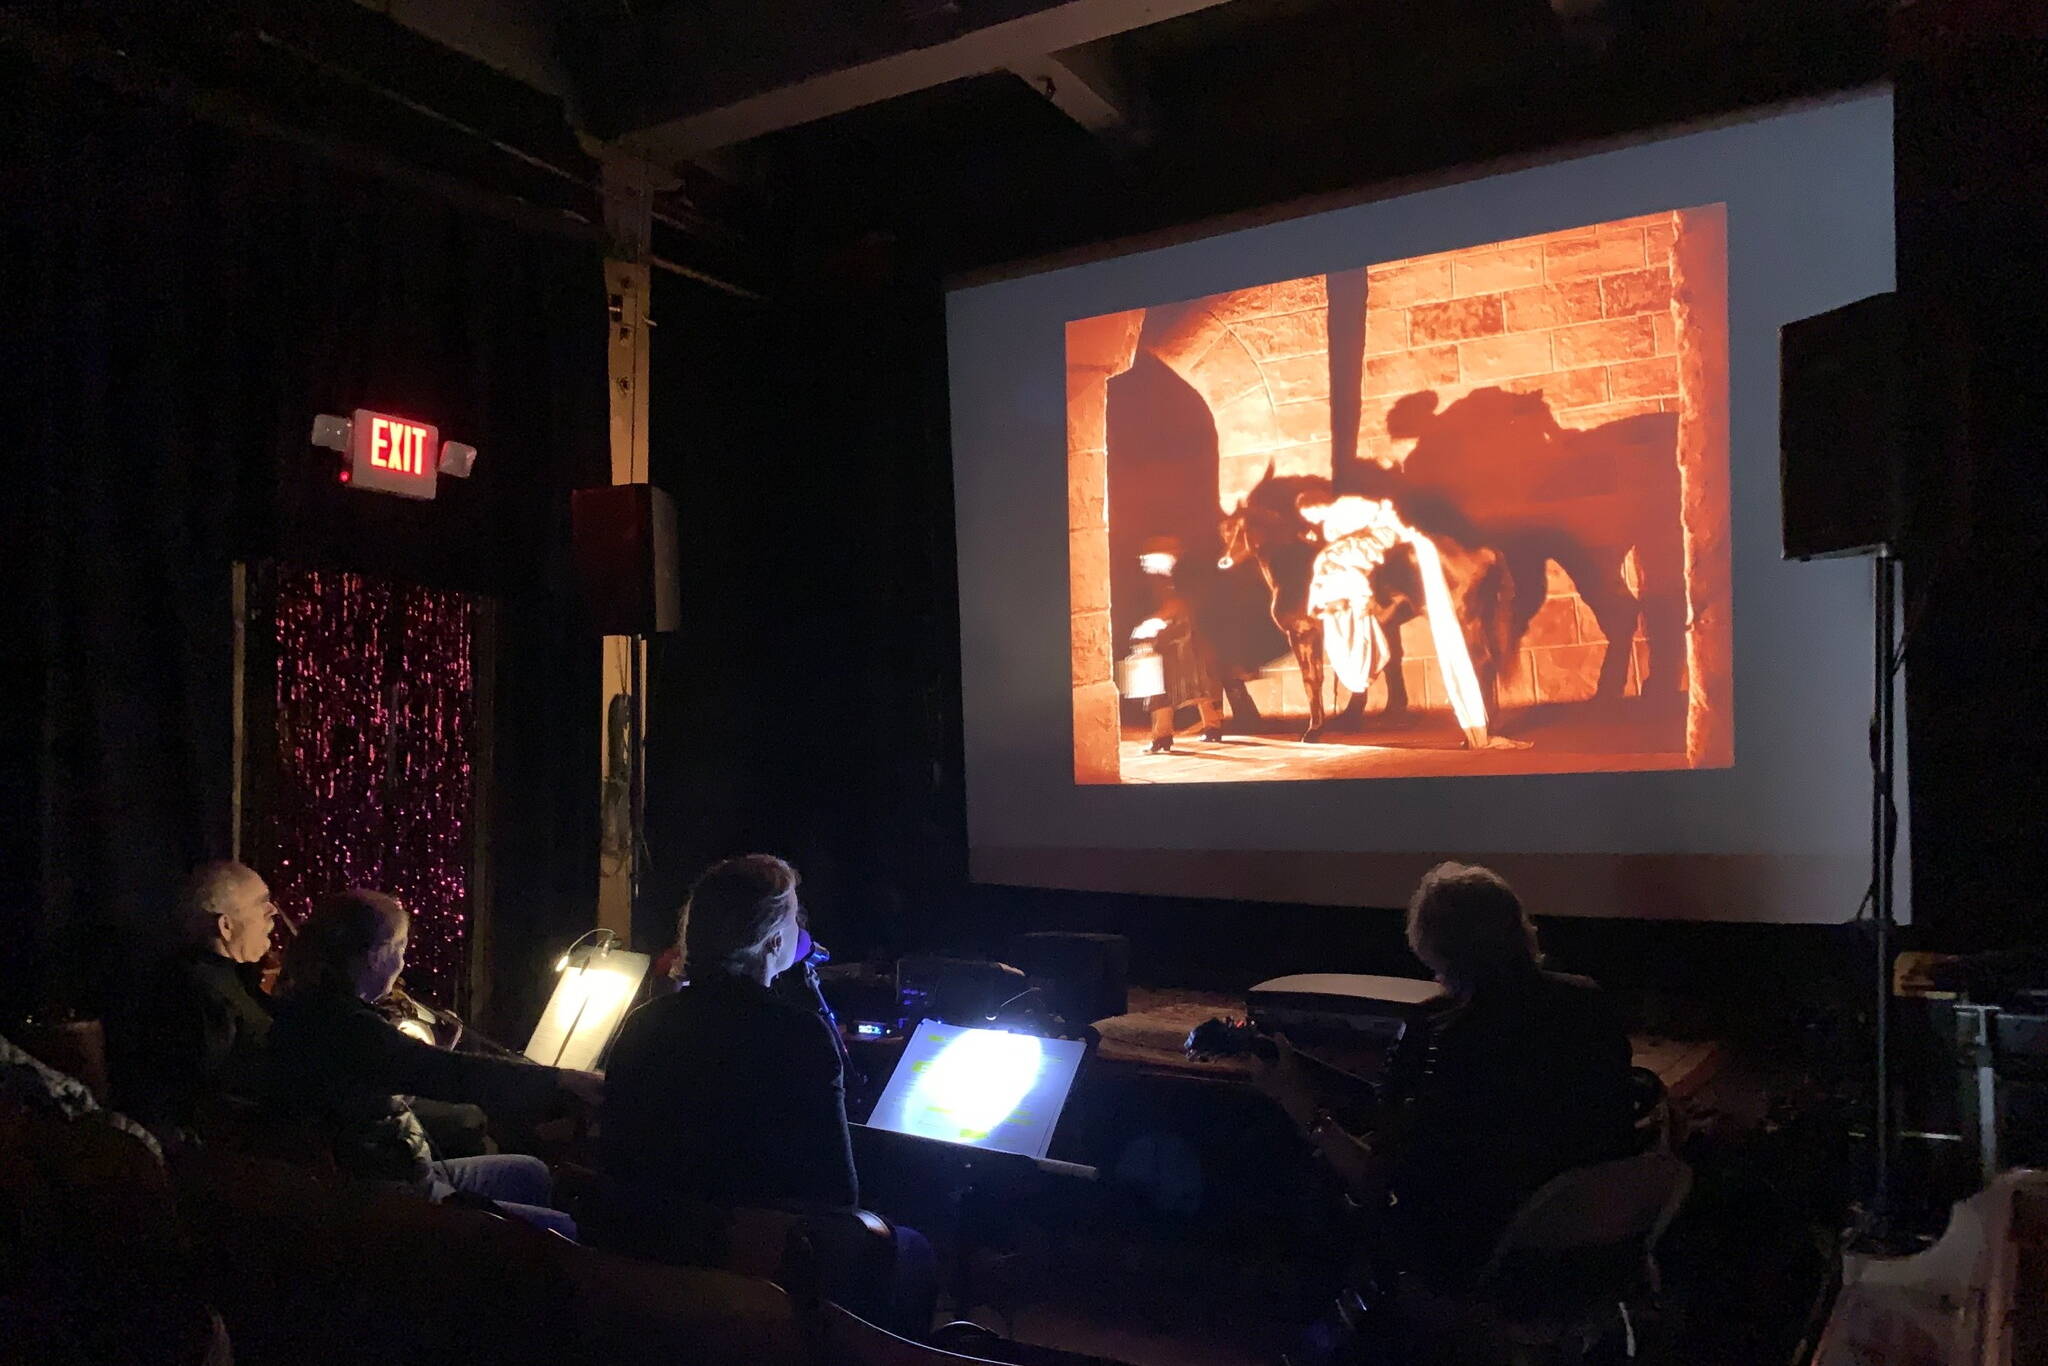 “The Phantom of the Opera” is screened with a live musical soundtrack at the Gold Town Theater in April. Three of the musicians are scheduled to perform Sunday during two screenings of the 1928 silent film “The Wind.” (Courtesy of Gold Town Theater)